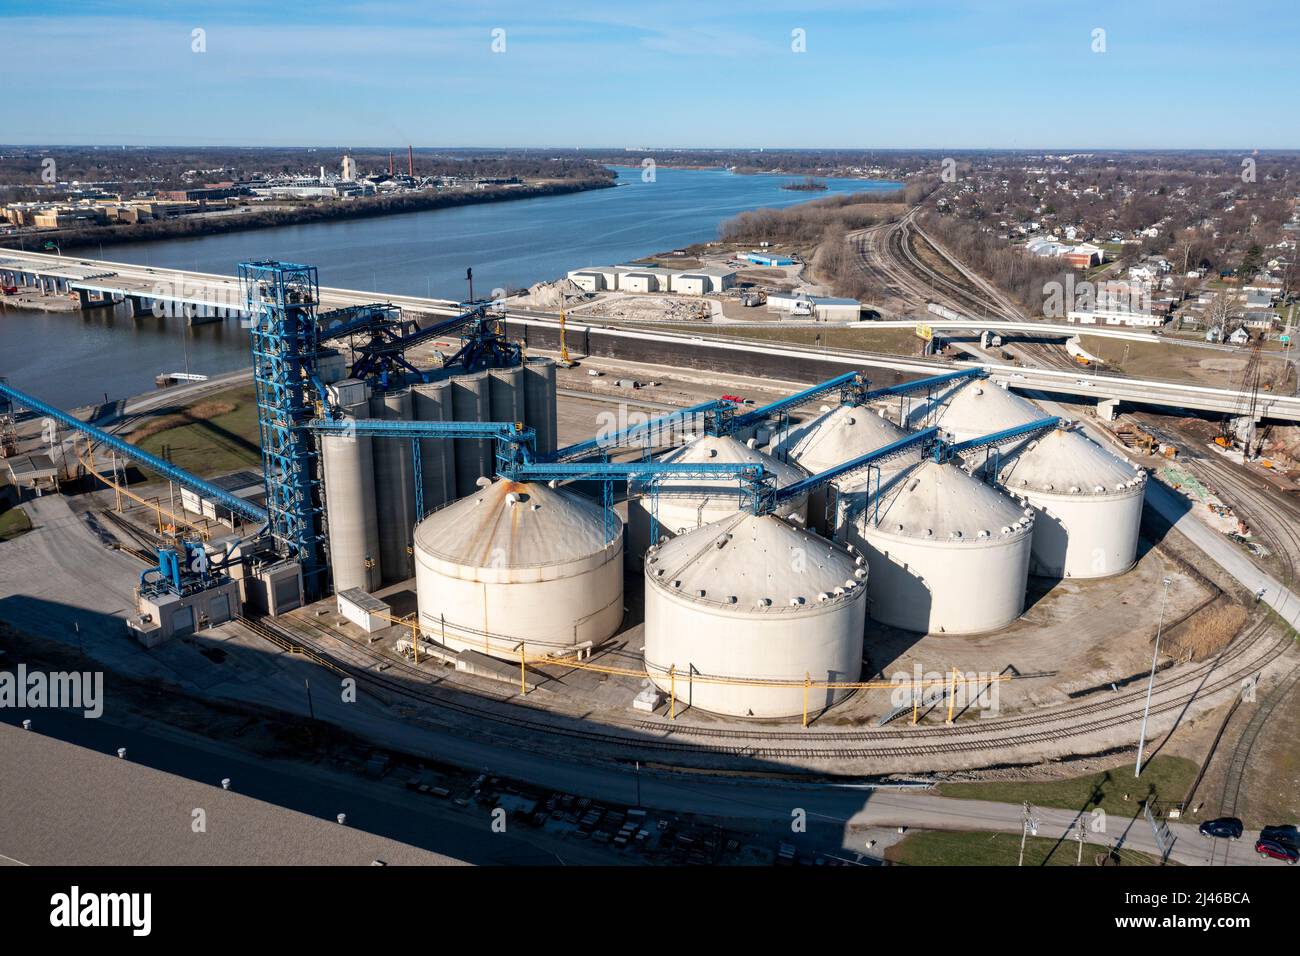 Toledo, Ohio - A grain terminal on the Maumee River operated by The Andersons, a major agribusiness corporation. Stock Photo